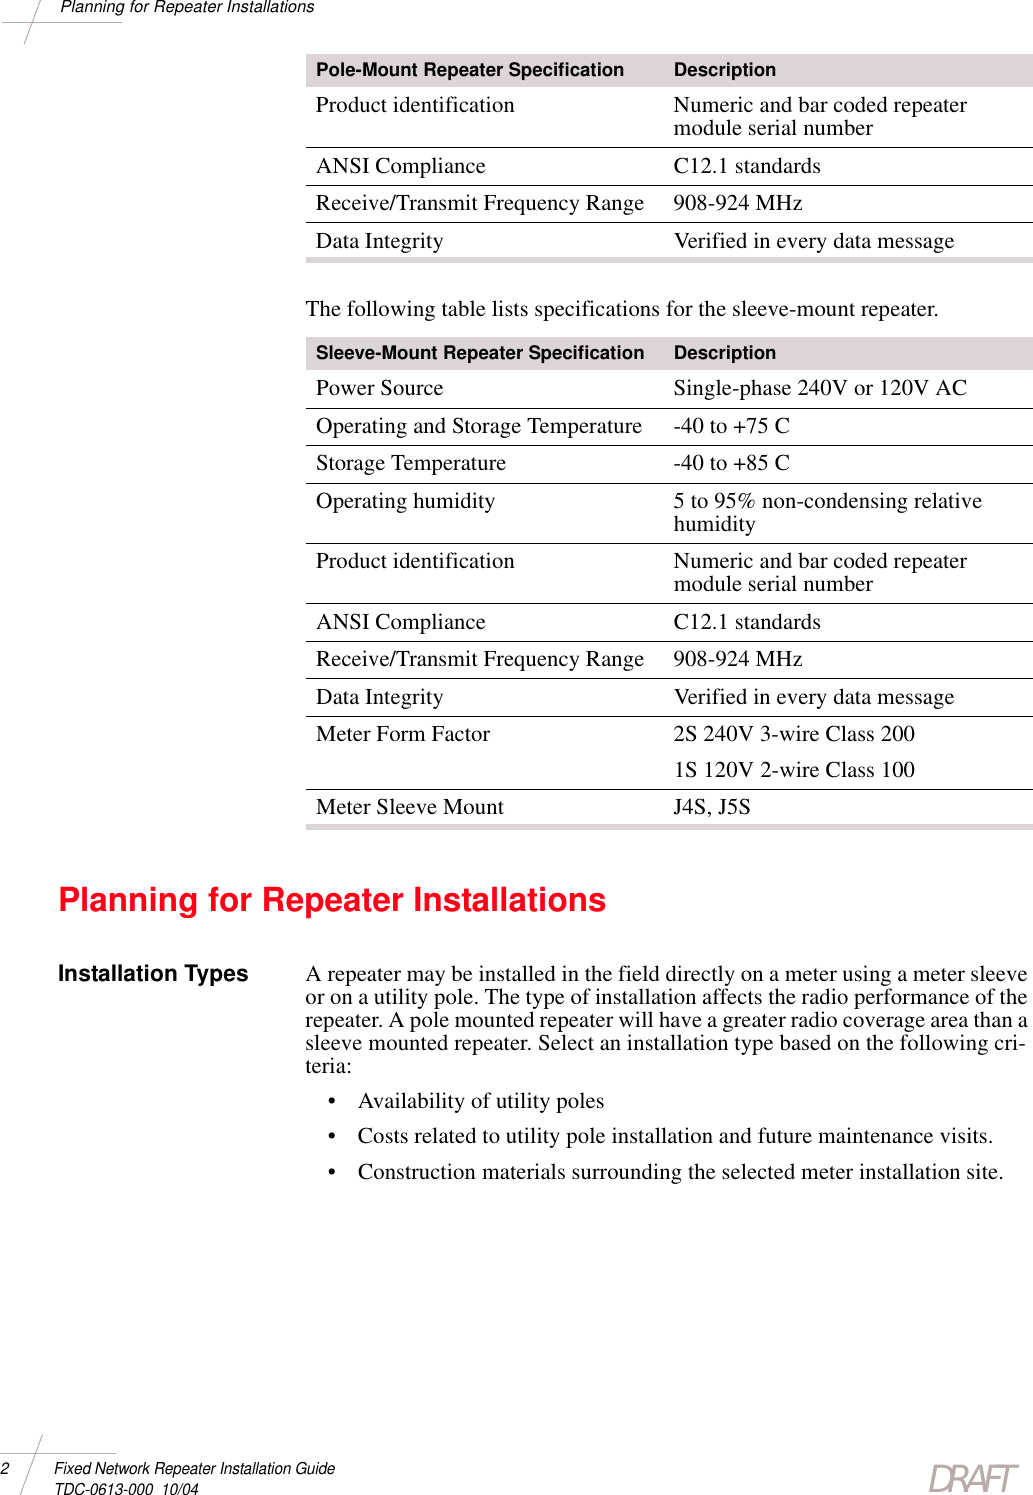 DRAFT2 Fixed Network Repeater Installation Guide TDC-0613-000  10/04Planning for Repeater InstallationsThe following table lists specifications for the sleeve-mount repeater.Planning for Repeater InstallationsInstallation Types A repeater may be installed in the field directly on a meter using a meter sleeve or on a utility pole. The type of installation affects the radio performance of the repeater. A pole mounted repeater will have a greater radio coverage area than a sleeve mounted repeater. Select an installation type based on the following cri-teria:• Availability of utility poles• Costs related to utility pole installation and future maintenance visits.• Construction materials surrounding the selected meter installation site.Product identification Numeric and bar coded repeater module serial numberANSI Compliance C12.1 standardsReceive/Transmit Frequency Range 908-924 MHzData Integrity Verified in every data messagePole-Mount Repeater Specification DescriptionSleeve-Mount Repeater Specification DescriptionPower Source Single-phase 240V or 120V ACOperating and Storage Temperature -40 to +75 C Storage Temperature -40 to +85 C Operating humidity 5 to 95% non-condensing relative humidityProduct identification Numeric and bar coded repeater module serial numberANSI Compliance C12.1 standardsReceive/Transmit Frequency Range 908-924 MHzData Integrity Verified in every data messageMeter Form Factor 2S 240V 3-wire Class 2001S 120V 2-wire Class 100Meter Sleeve Mount J4S, J5S